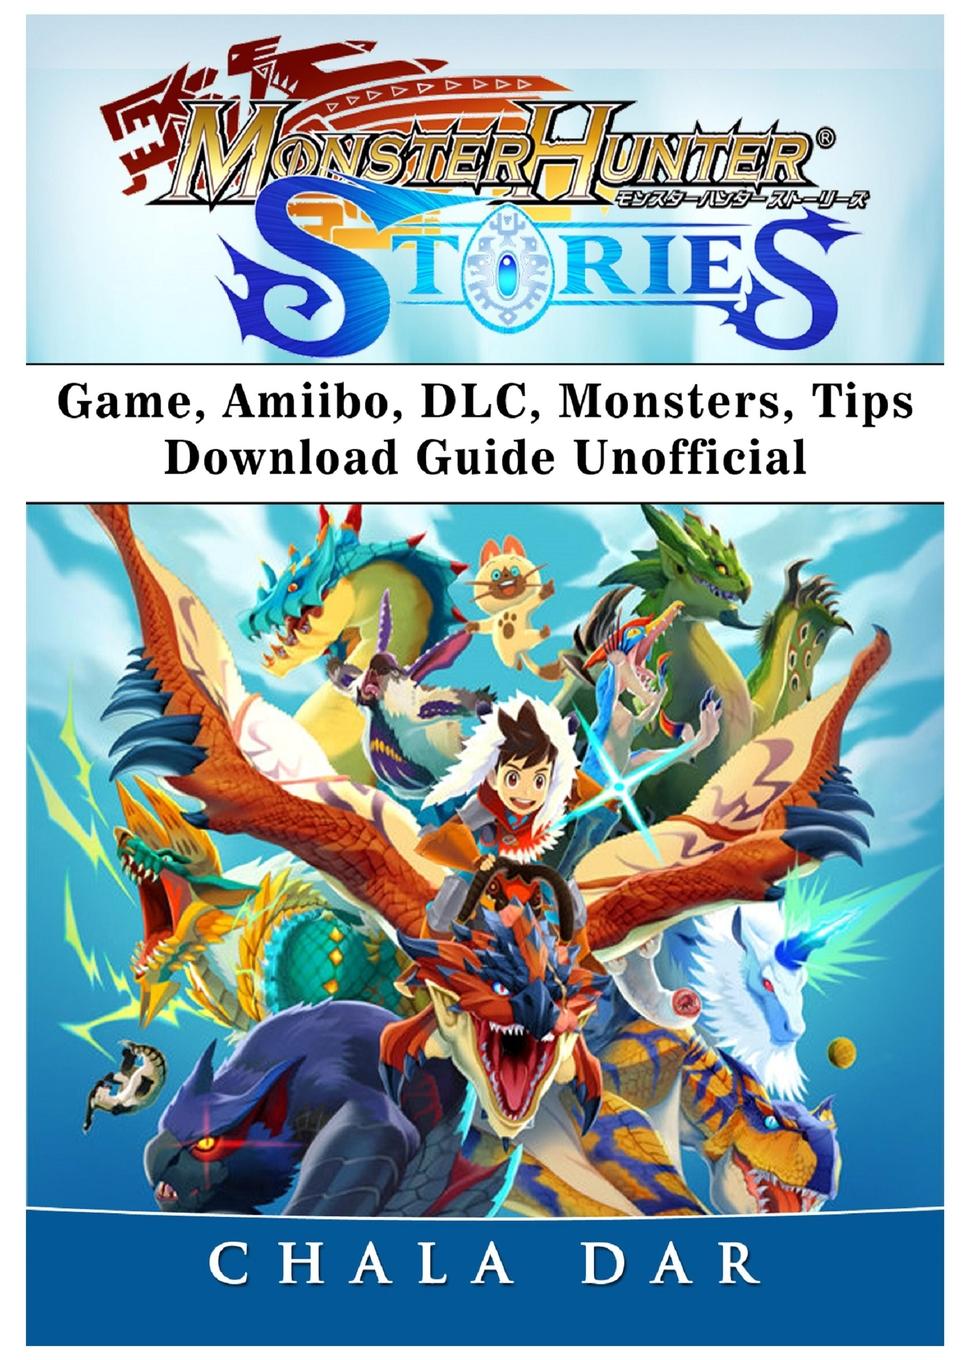 фото Monster Hunter Stories Game, Amiibo, DLC, Monsters, Tips, Download Guide Unofficial